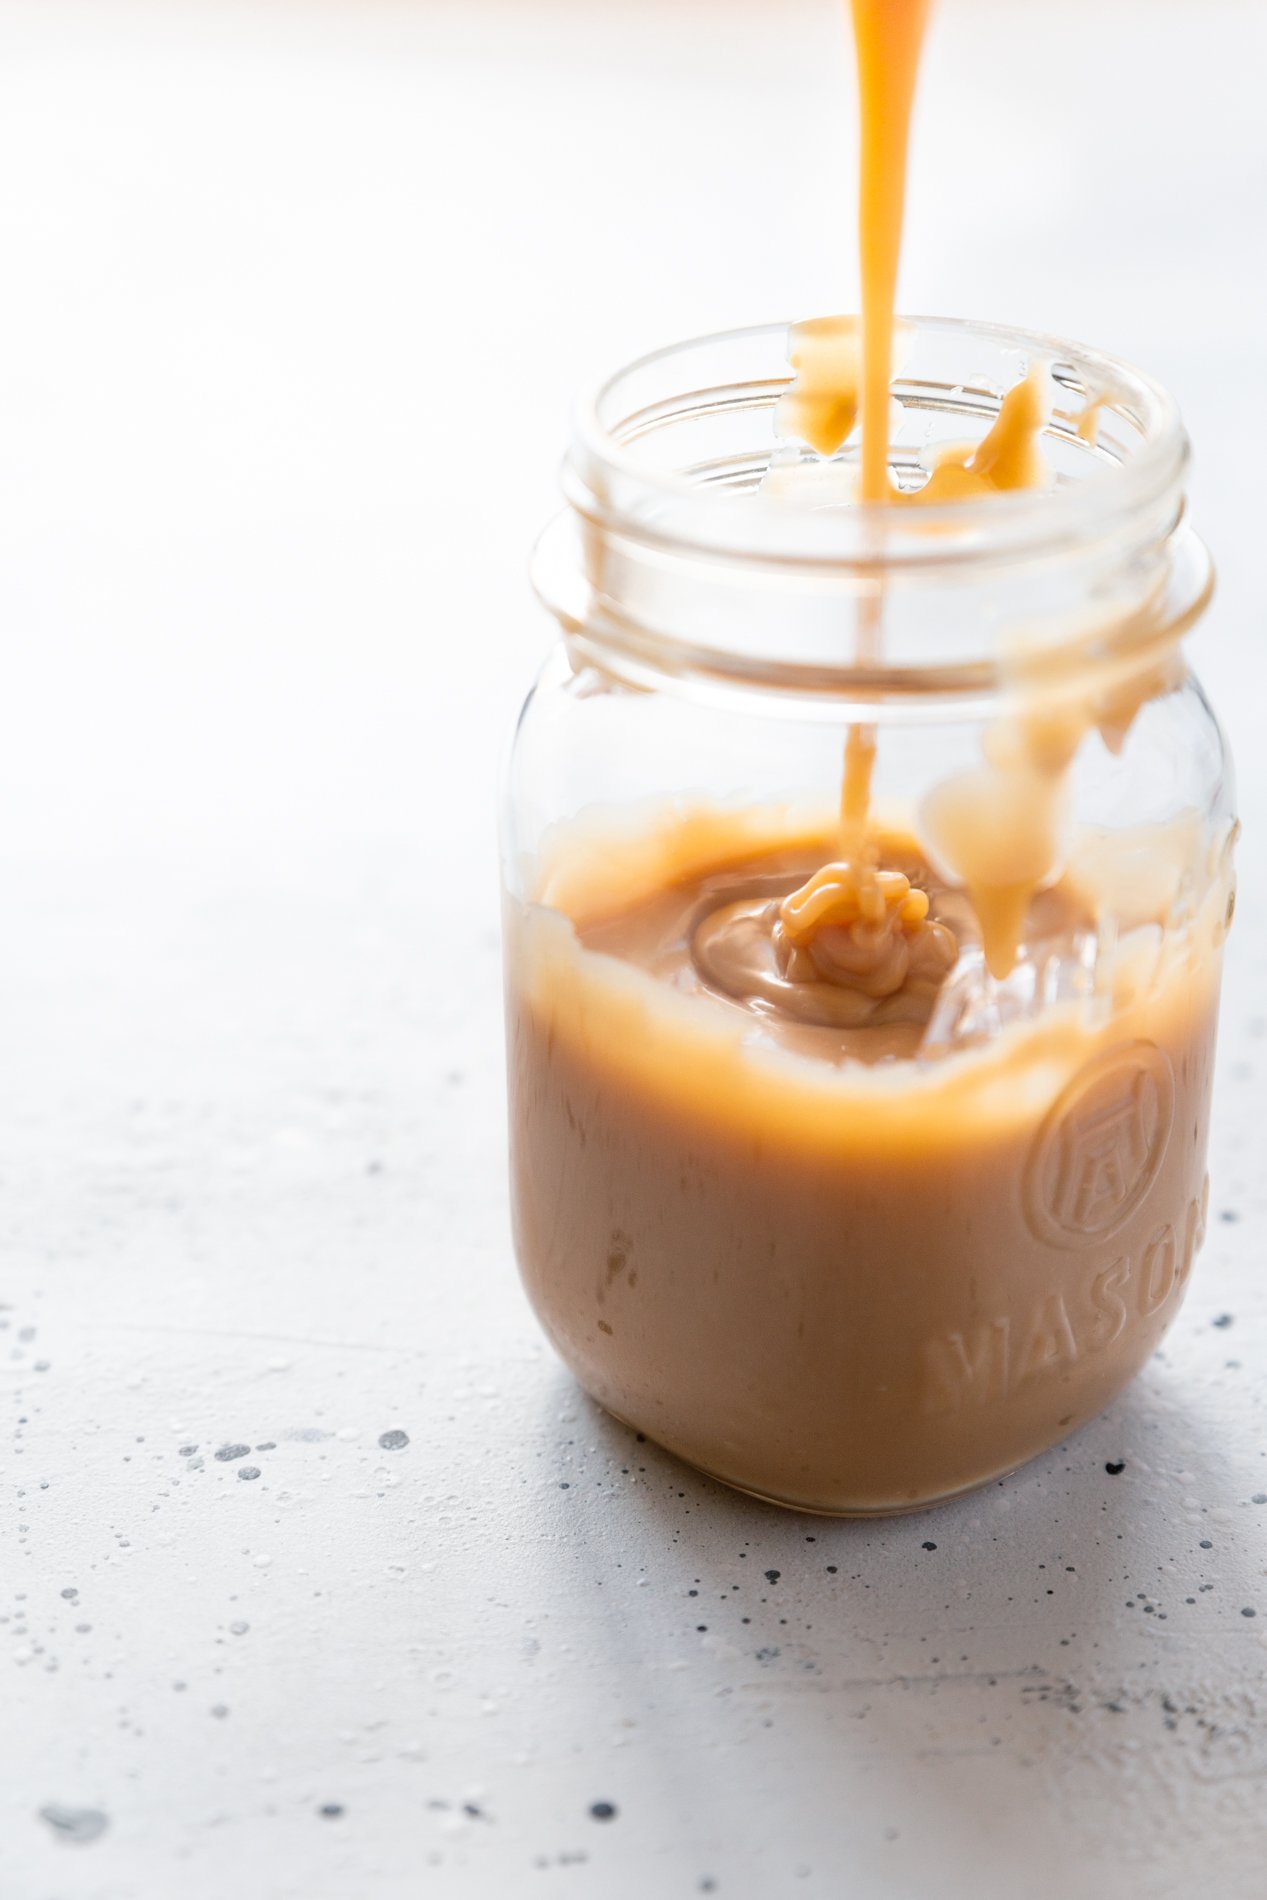 forty-five degree angled shot of a jar of dulce de leche, with a rivulet of caramel pouring into the jar.